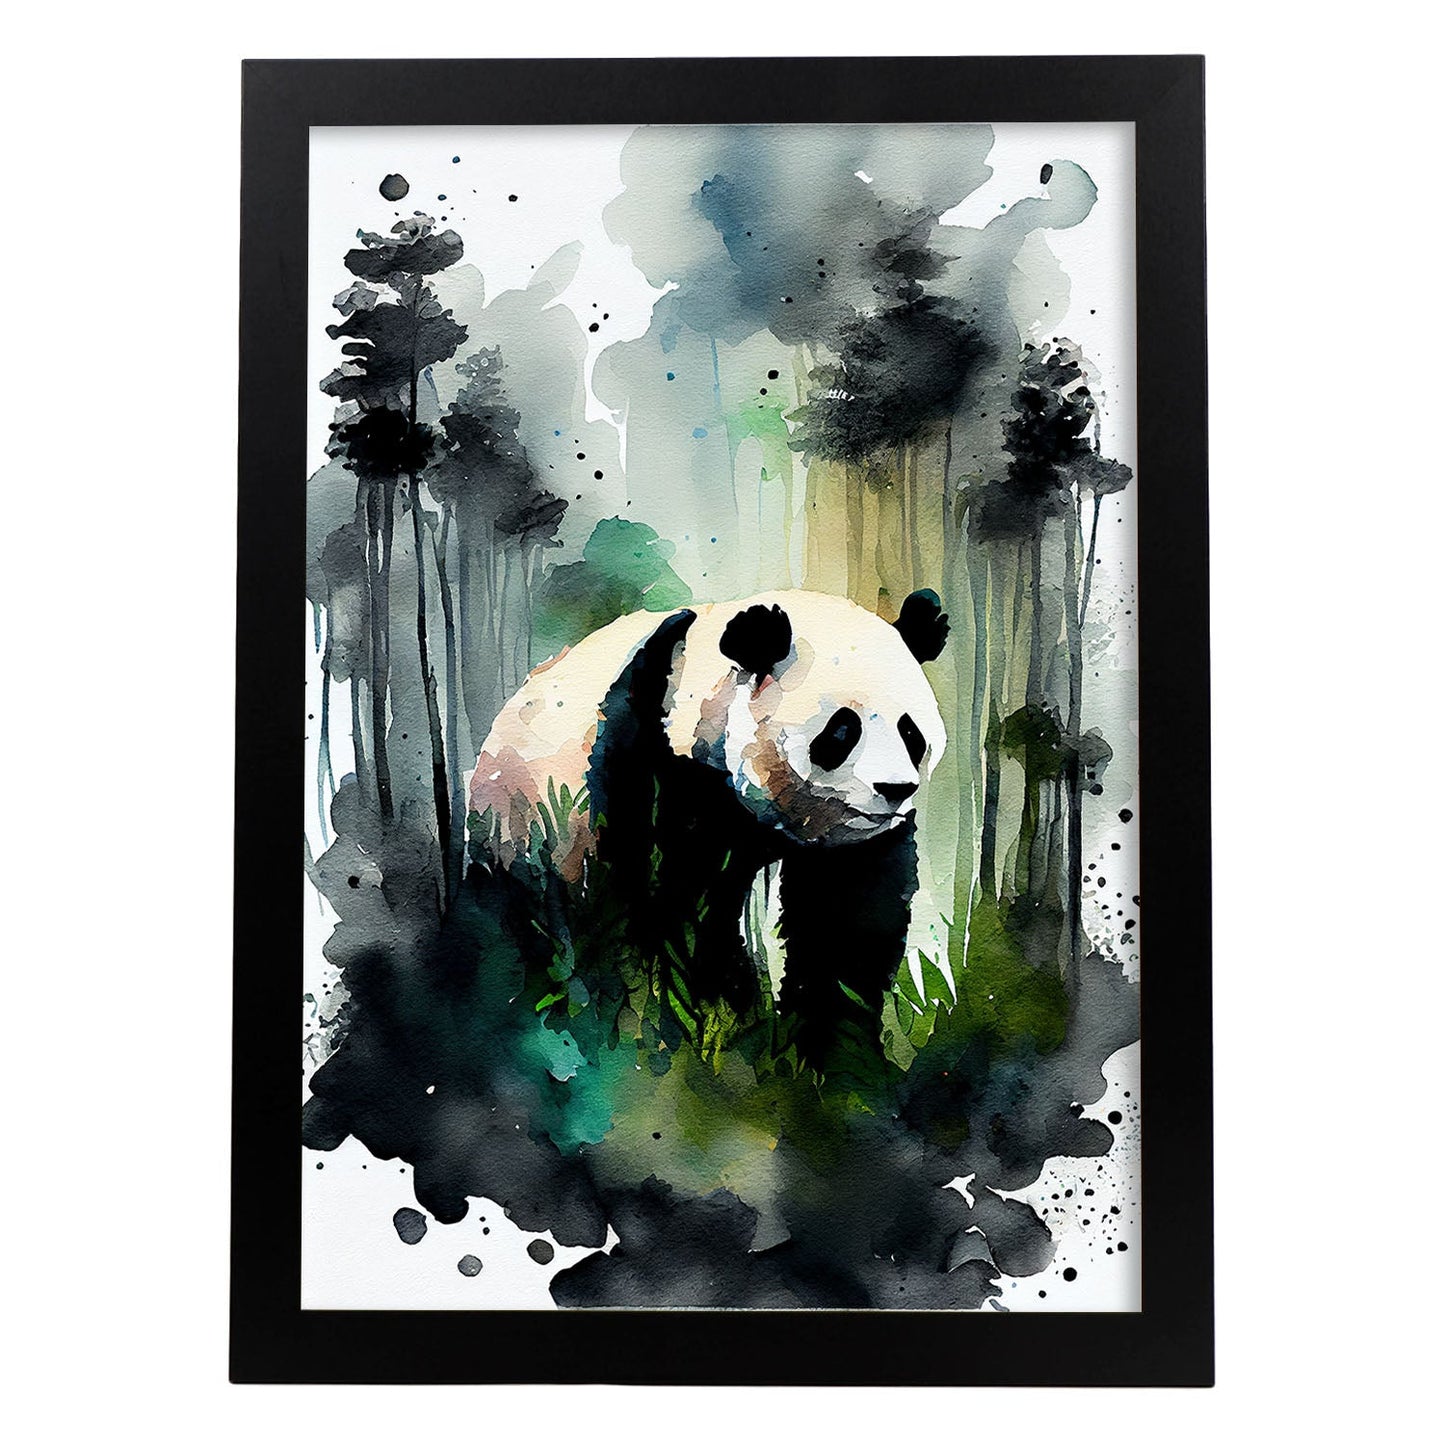 Nacnic Watercolor of Panda in the forest. Aesthetic Wall Art Prints for Bedroom or Living Room Design.